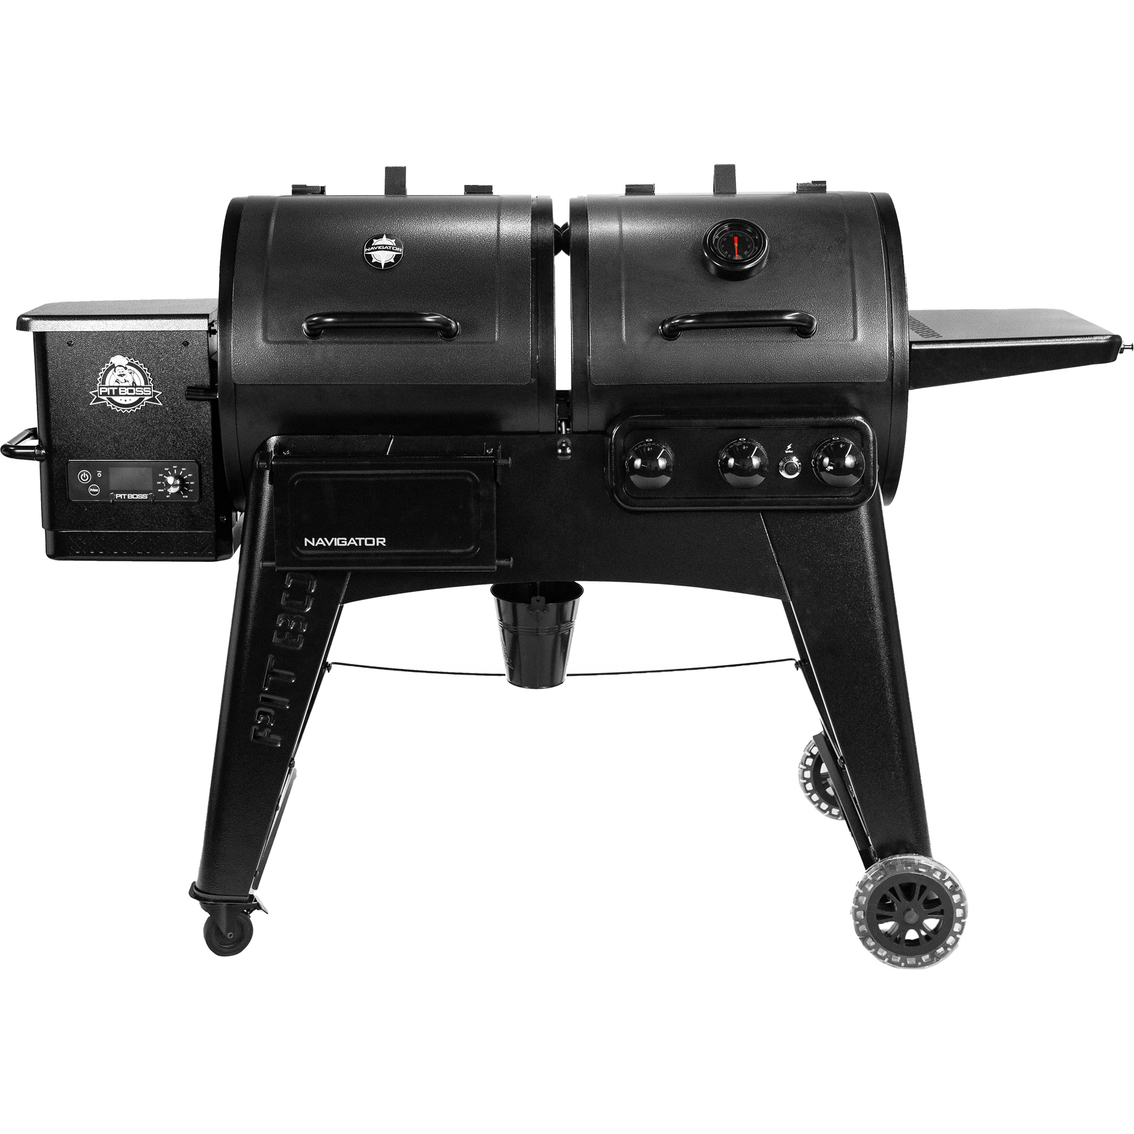 Pit Boss Combo 1230 Wood Pellet Grill - Image 2 of 6